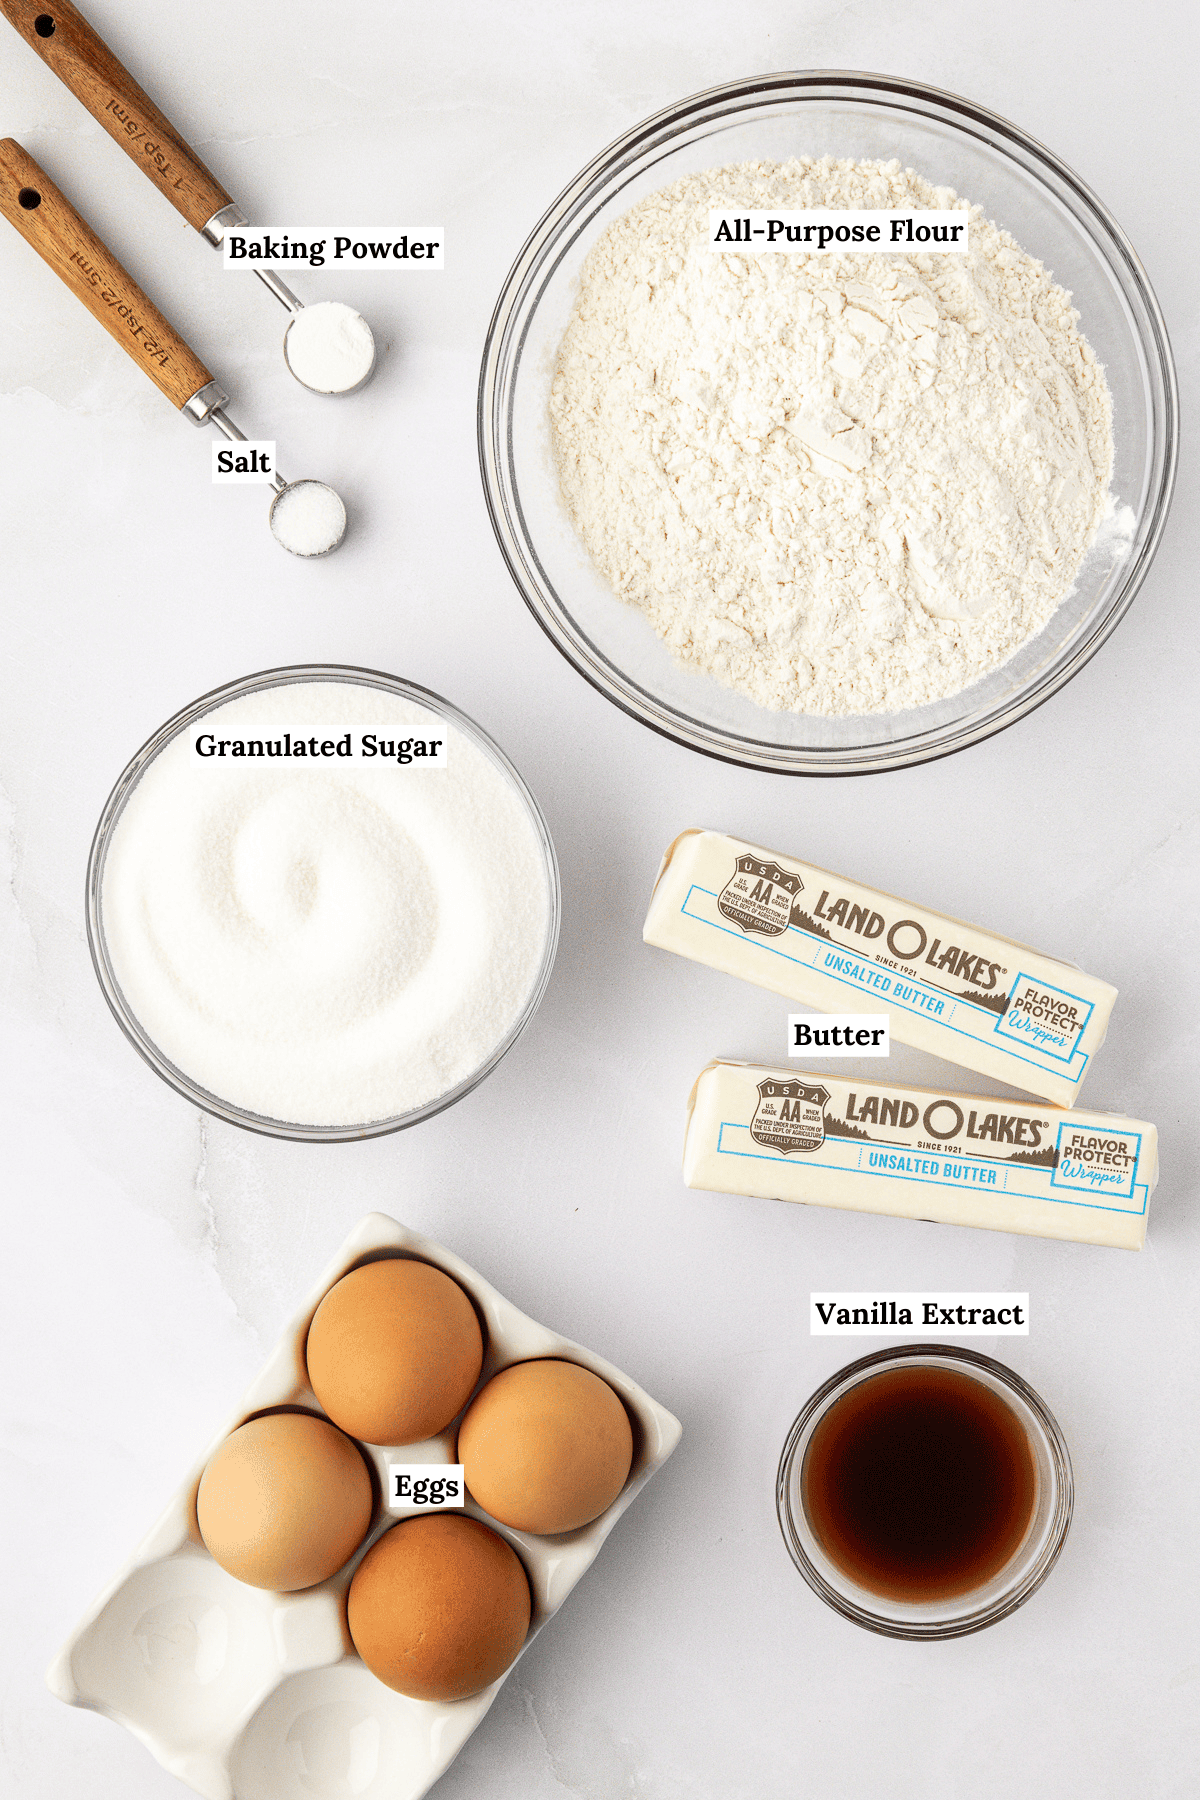 over head view of the ingredients for pound cake including baking powder, salt, all-purpose flour, two sticks of butter, granulated sugar, vanilla extract, and eggs